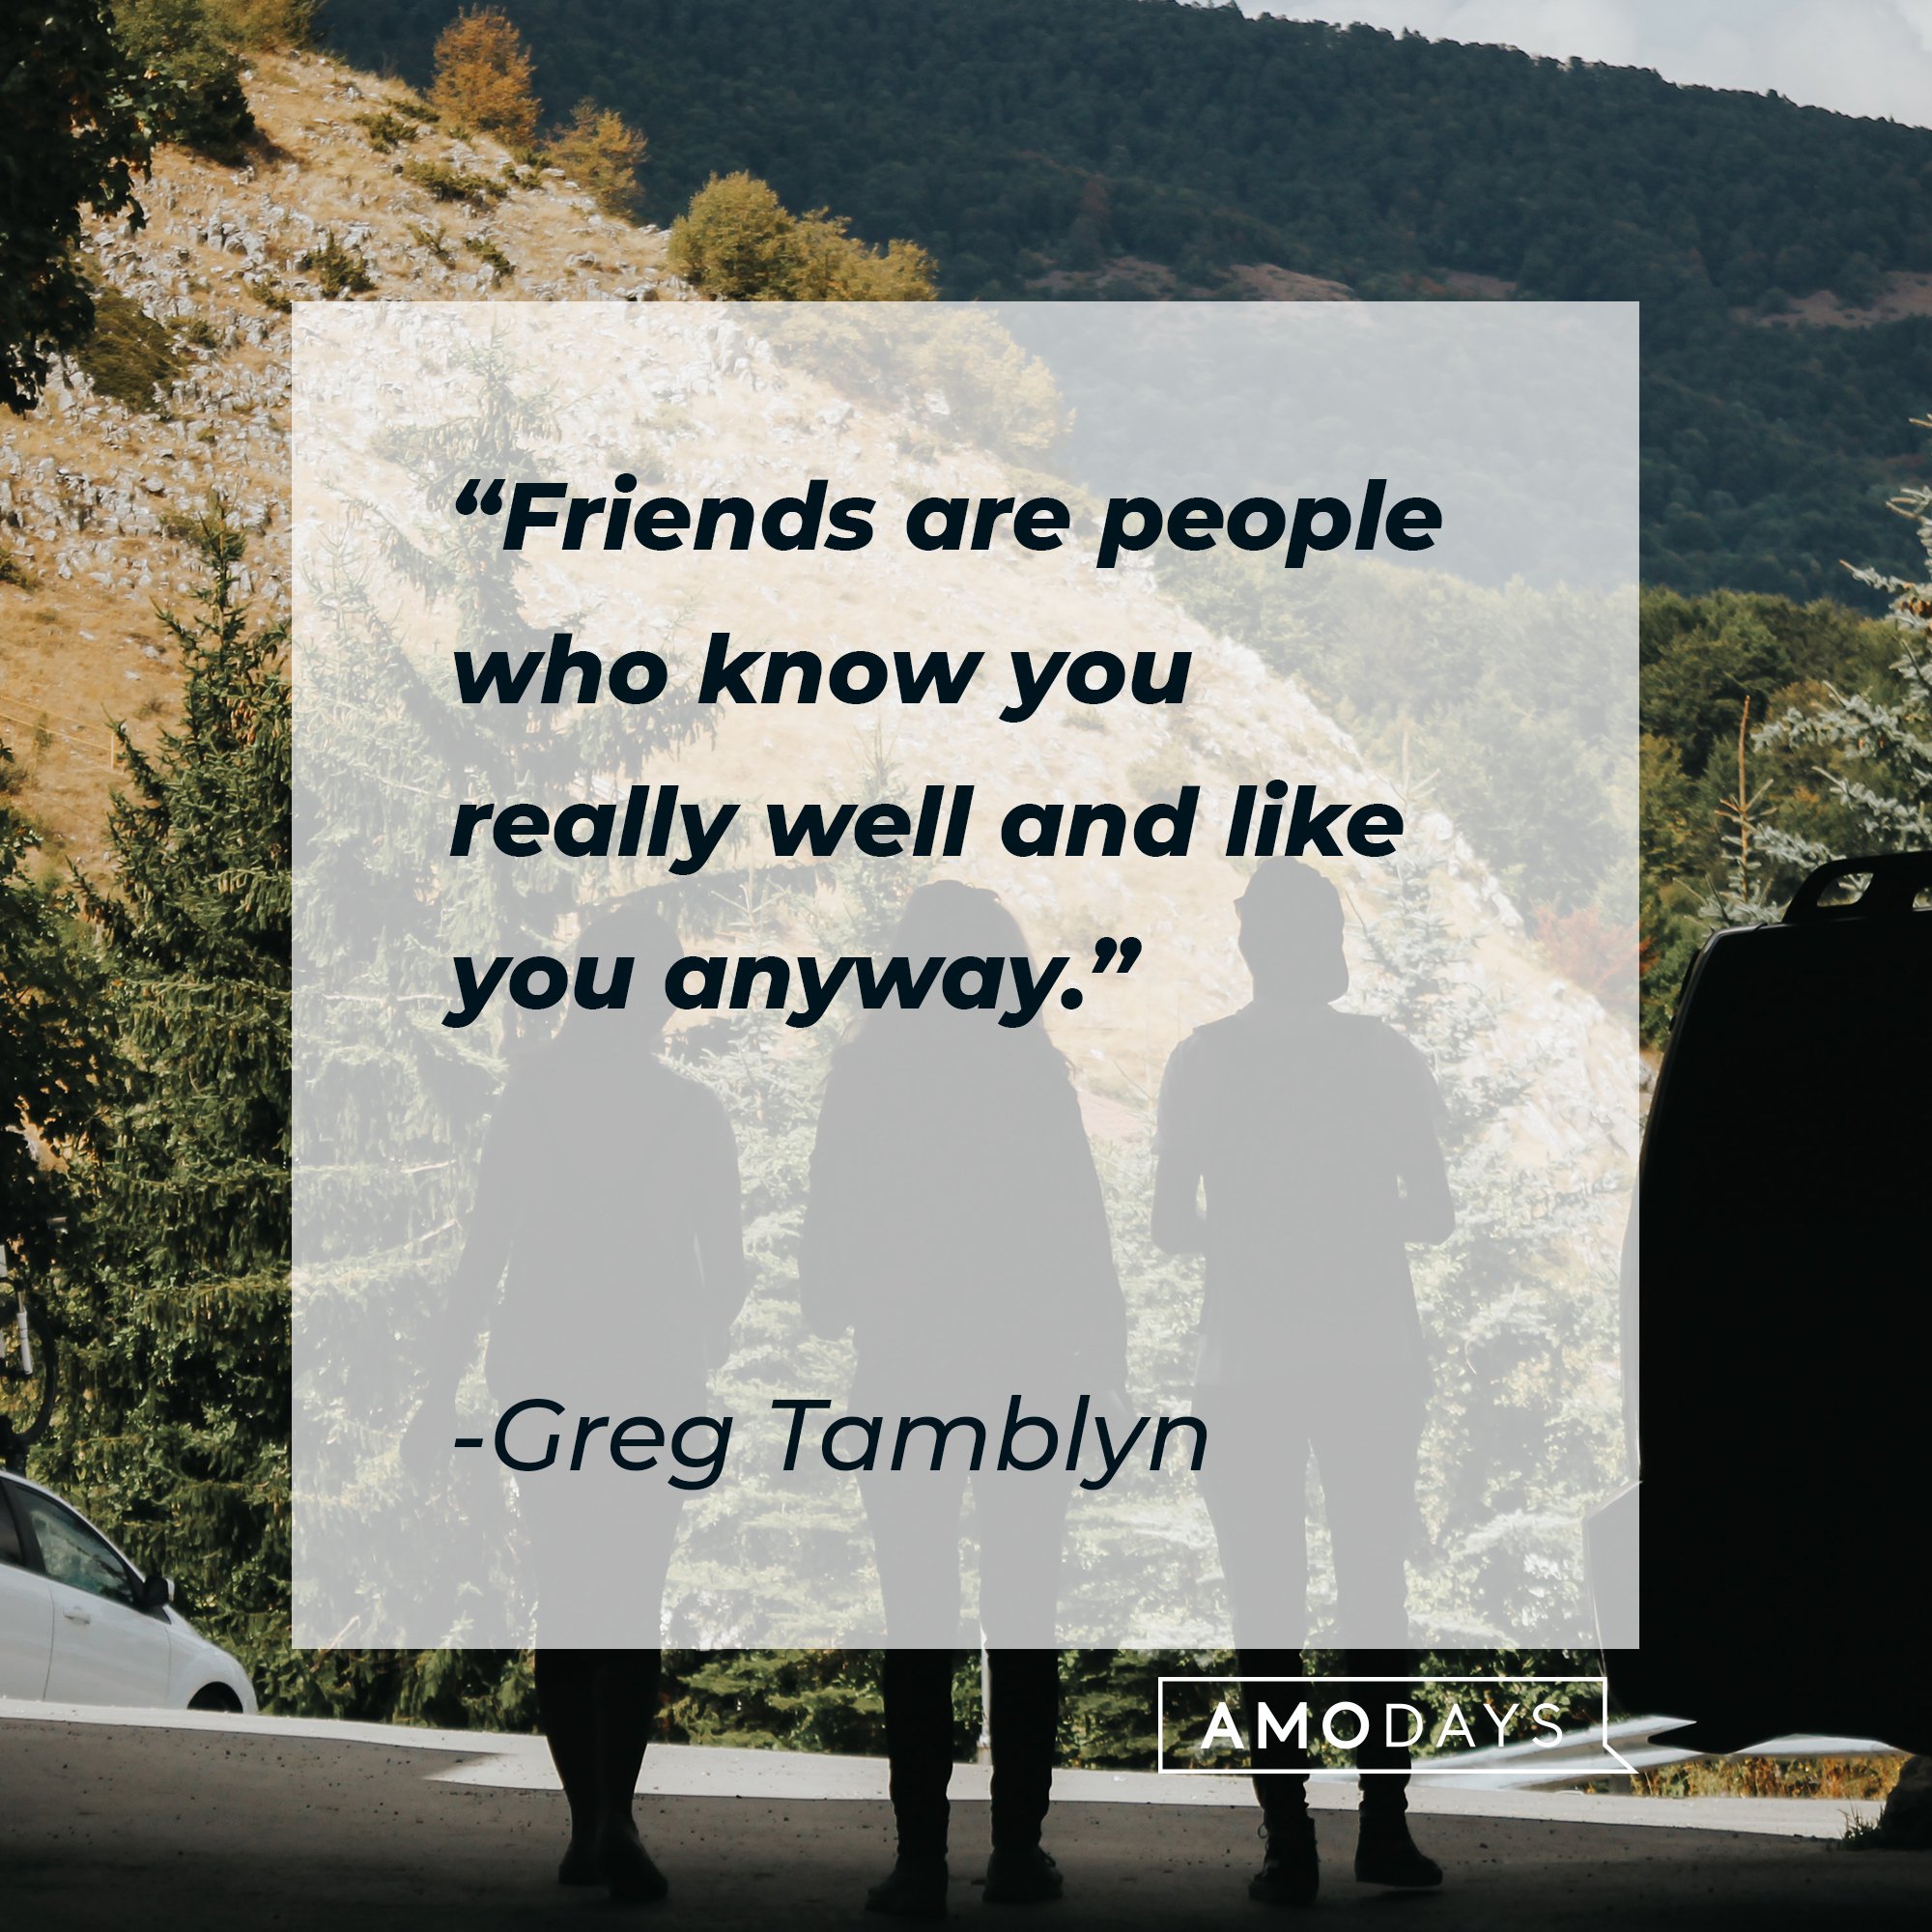 Greg Tamblyn’s quote: “Friends are people who know you really well and like you anyway.” | Image: AmoDays